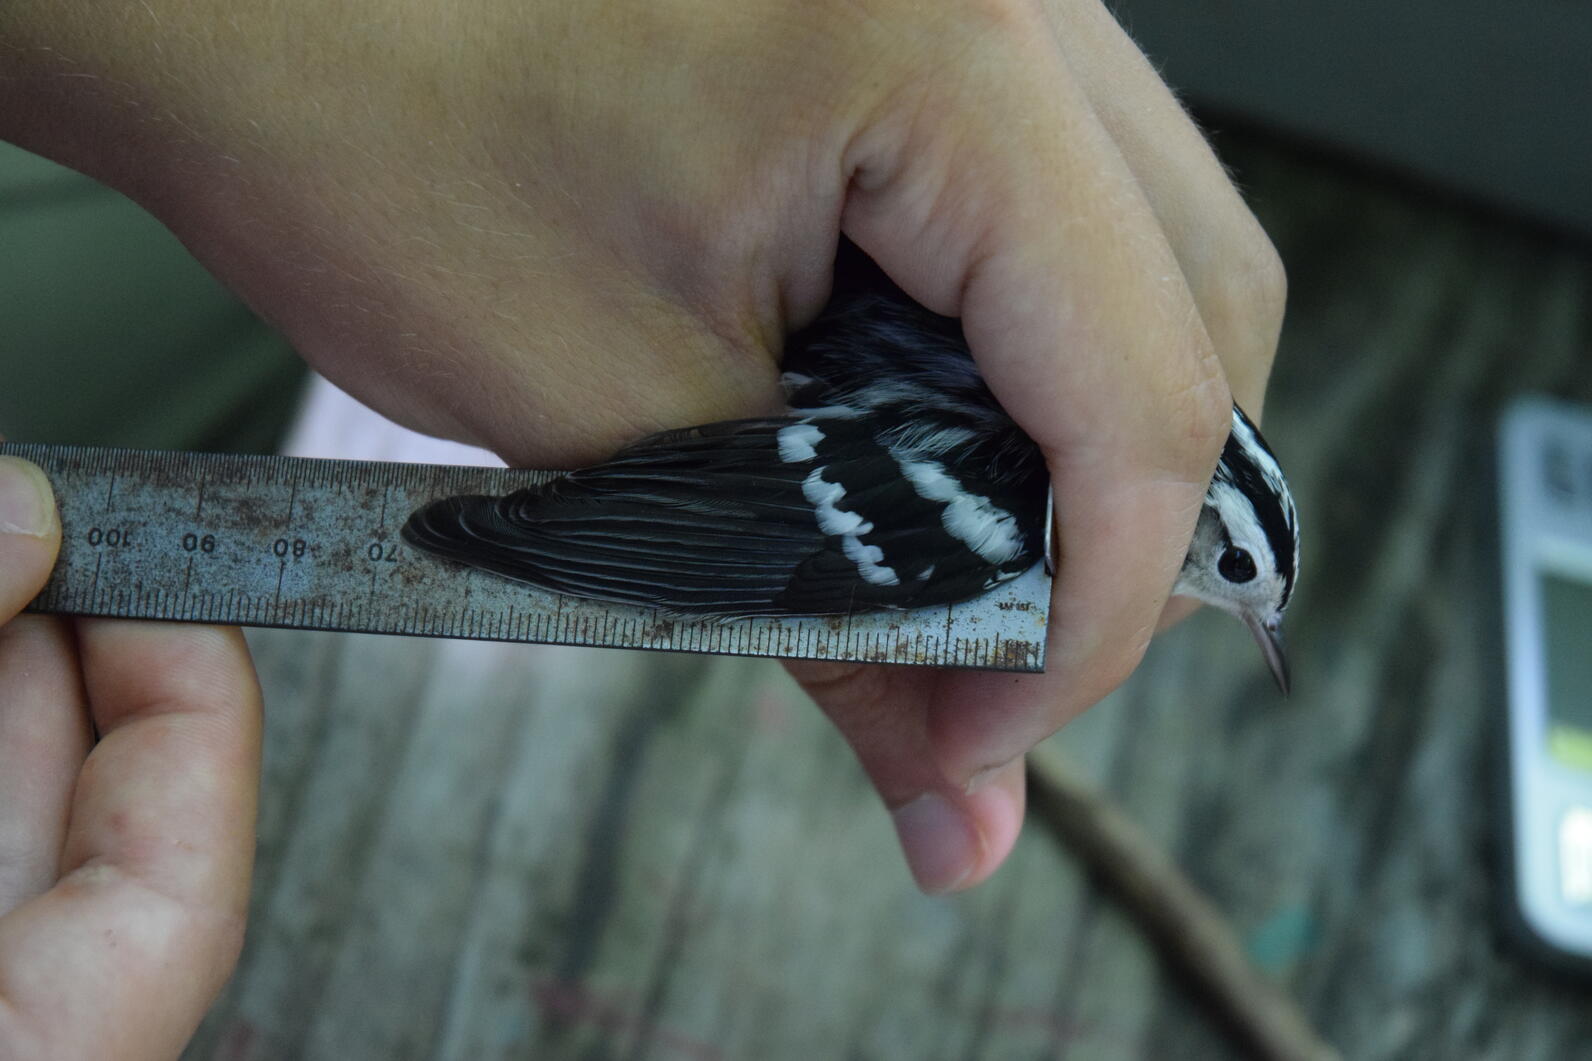 A Black-and-White Warbler has her wing measured - the wing is gently extended against a metal ruler. 